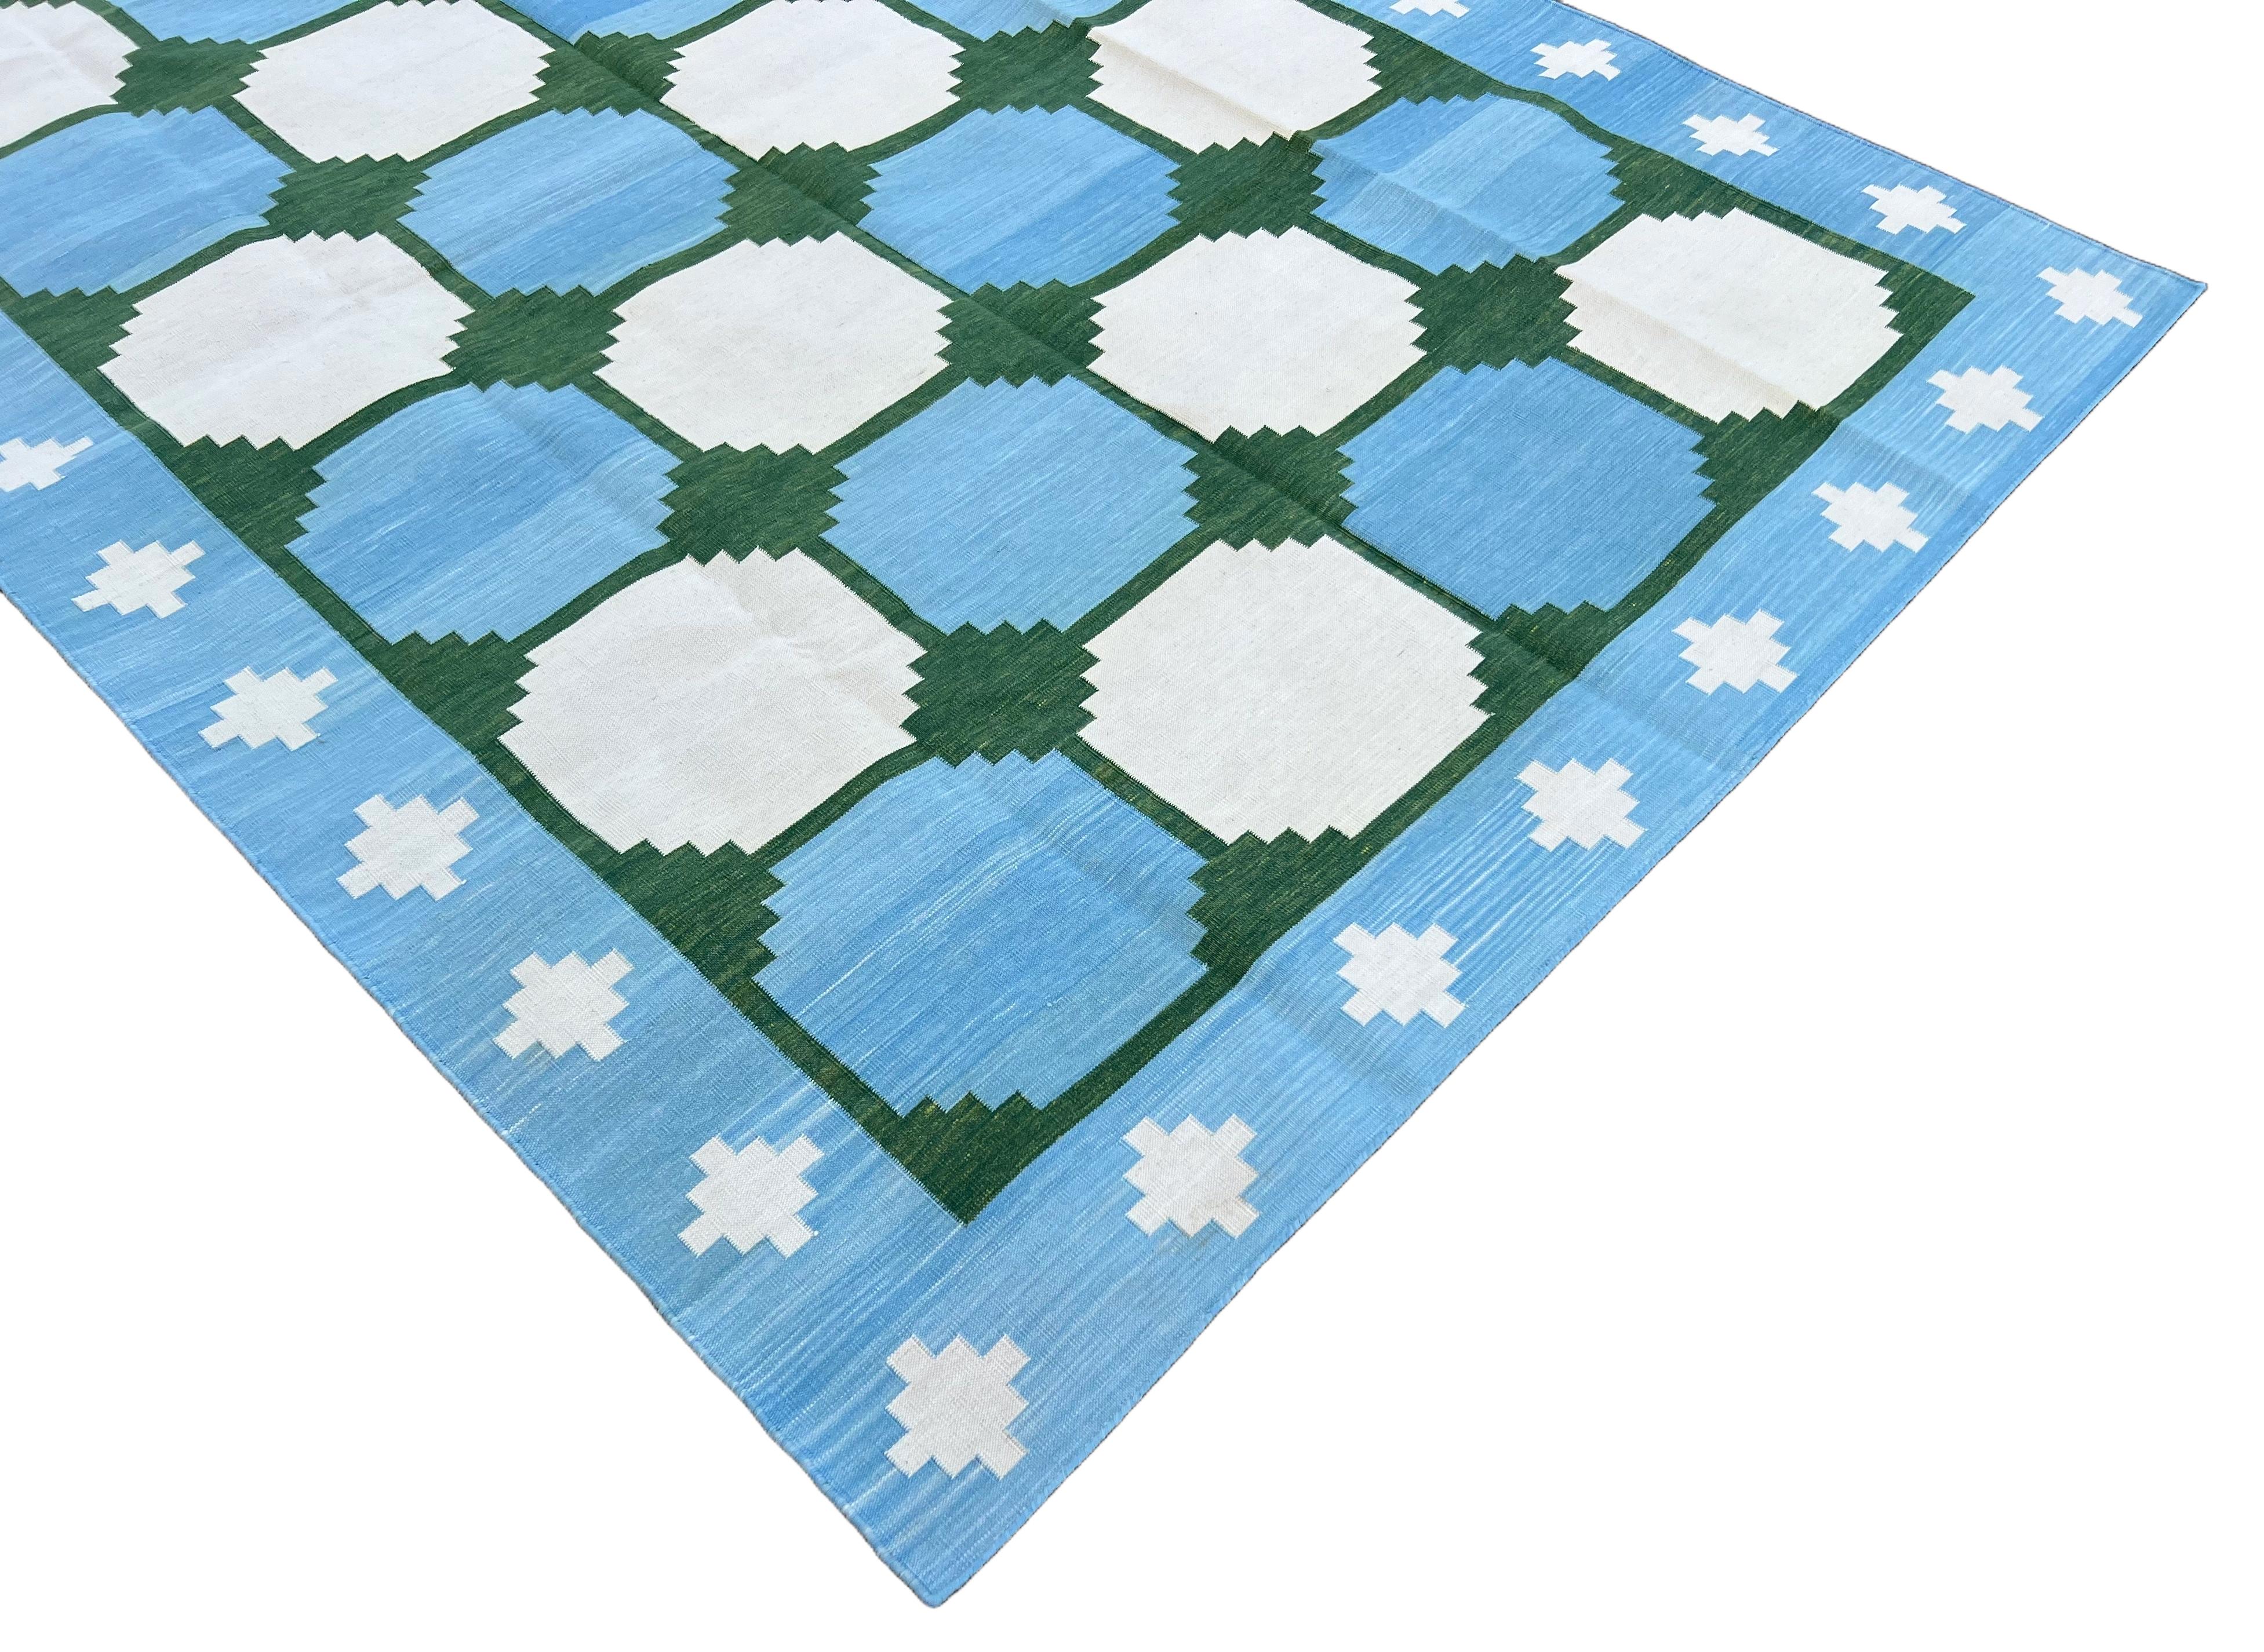 Hand-Woven Handmade Cotton Area Flat Weave Rug, 5x8 Blue And Green Tile Indian Dhurrie Rug For Sale